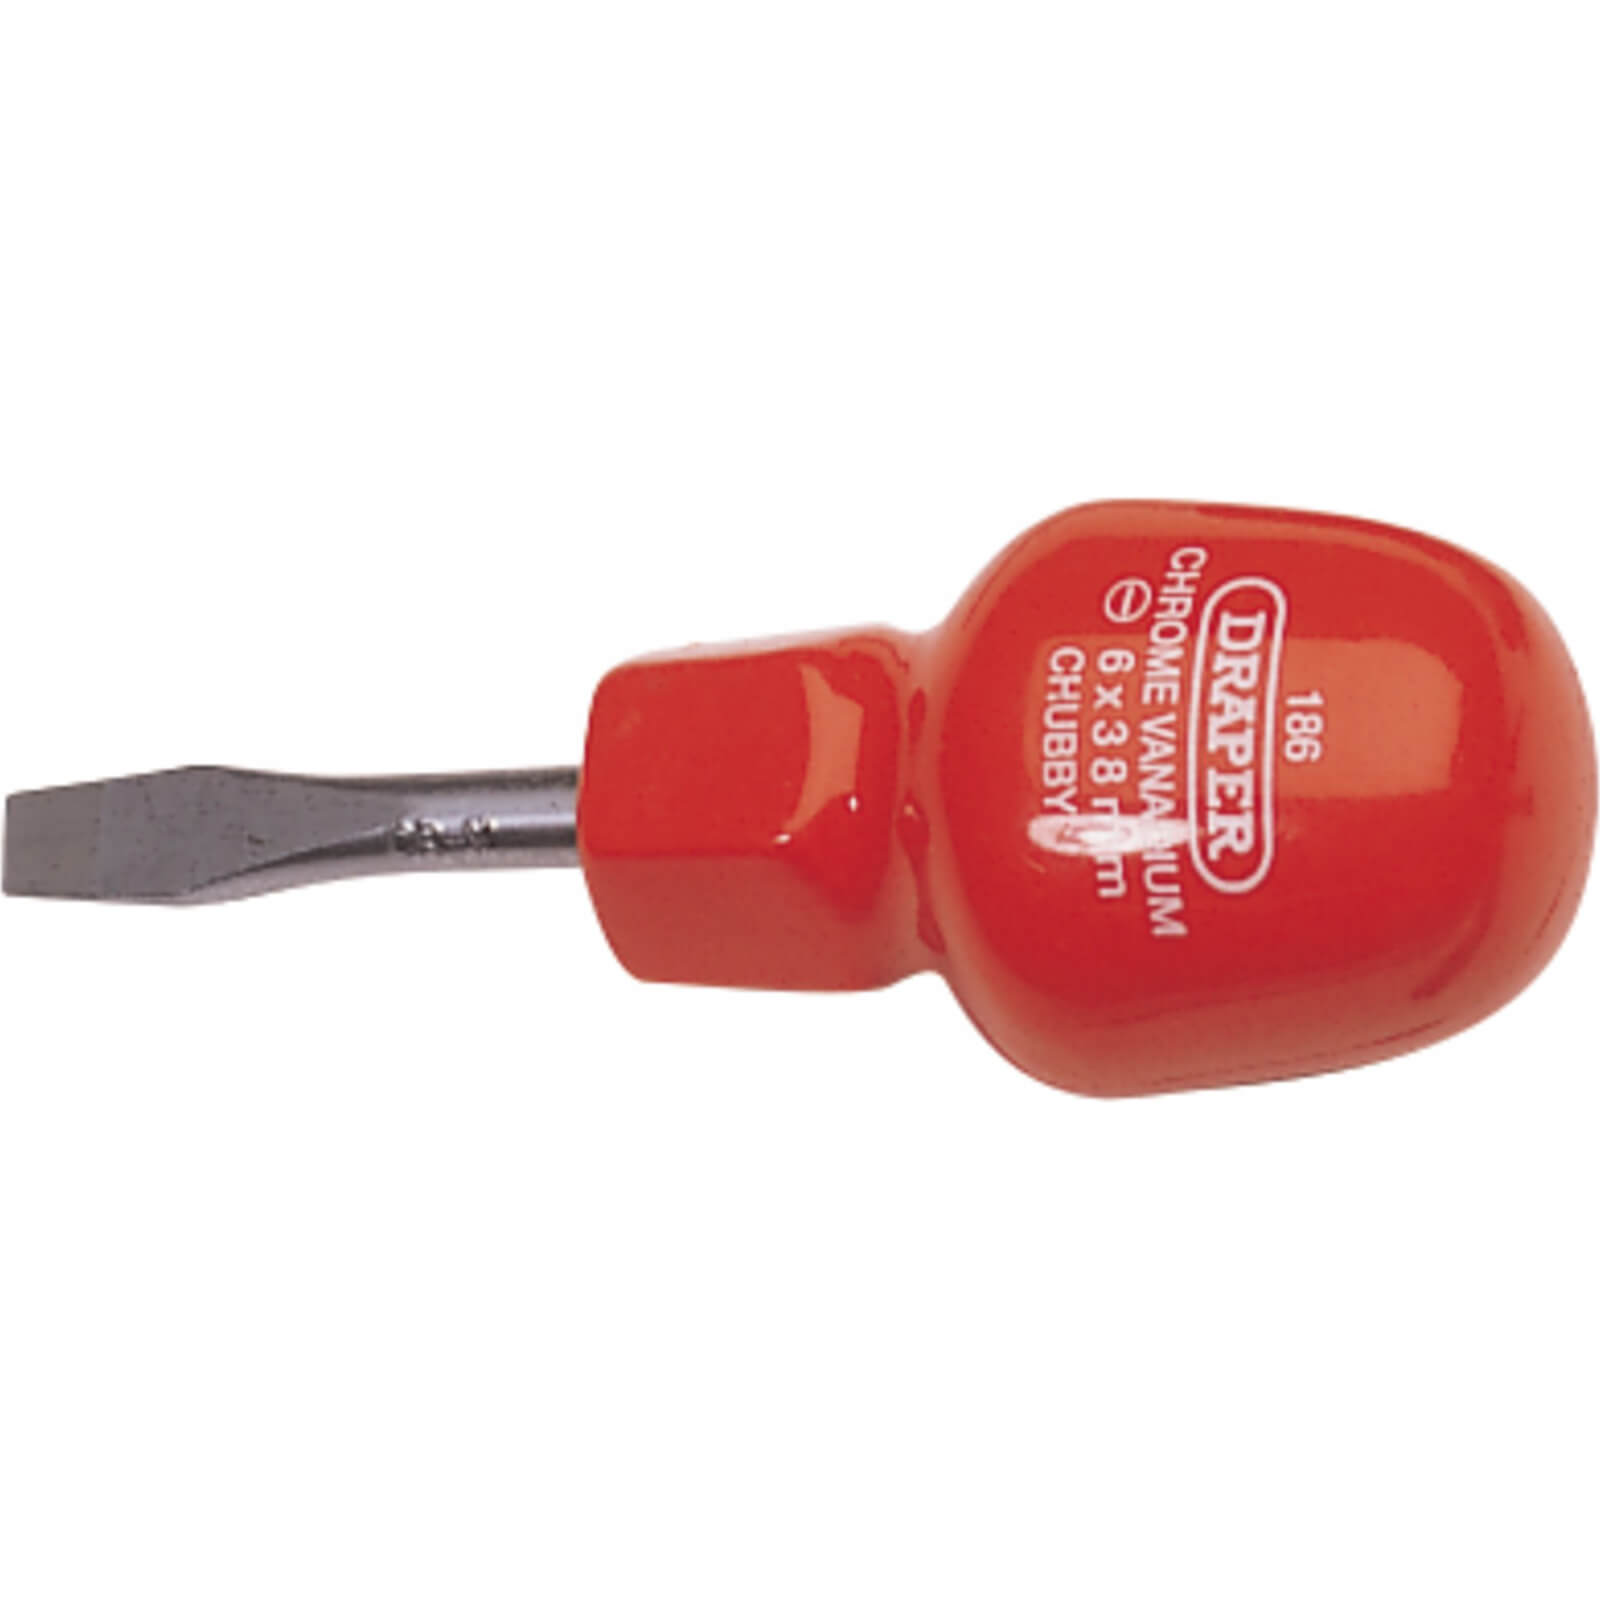 Image of Draper Cabinet Pattern Flared Slotted Screwdriver 6mm 38mm